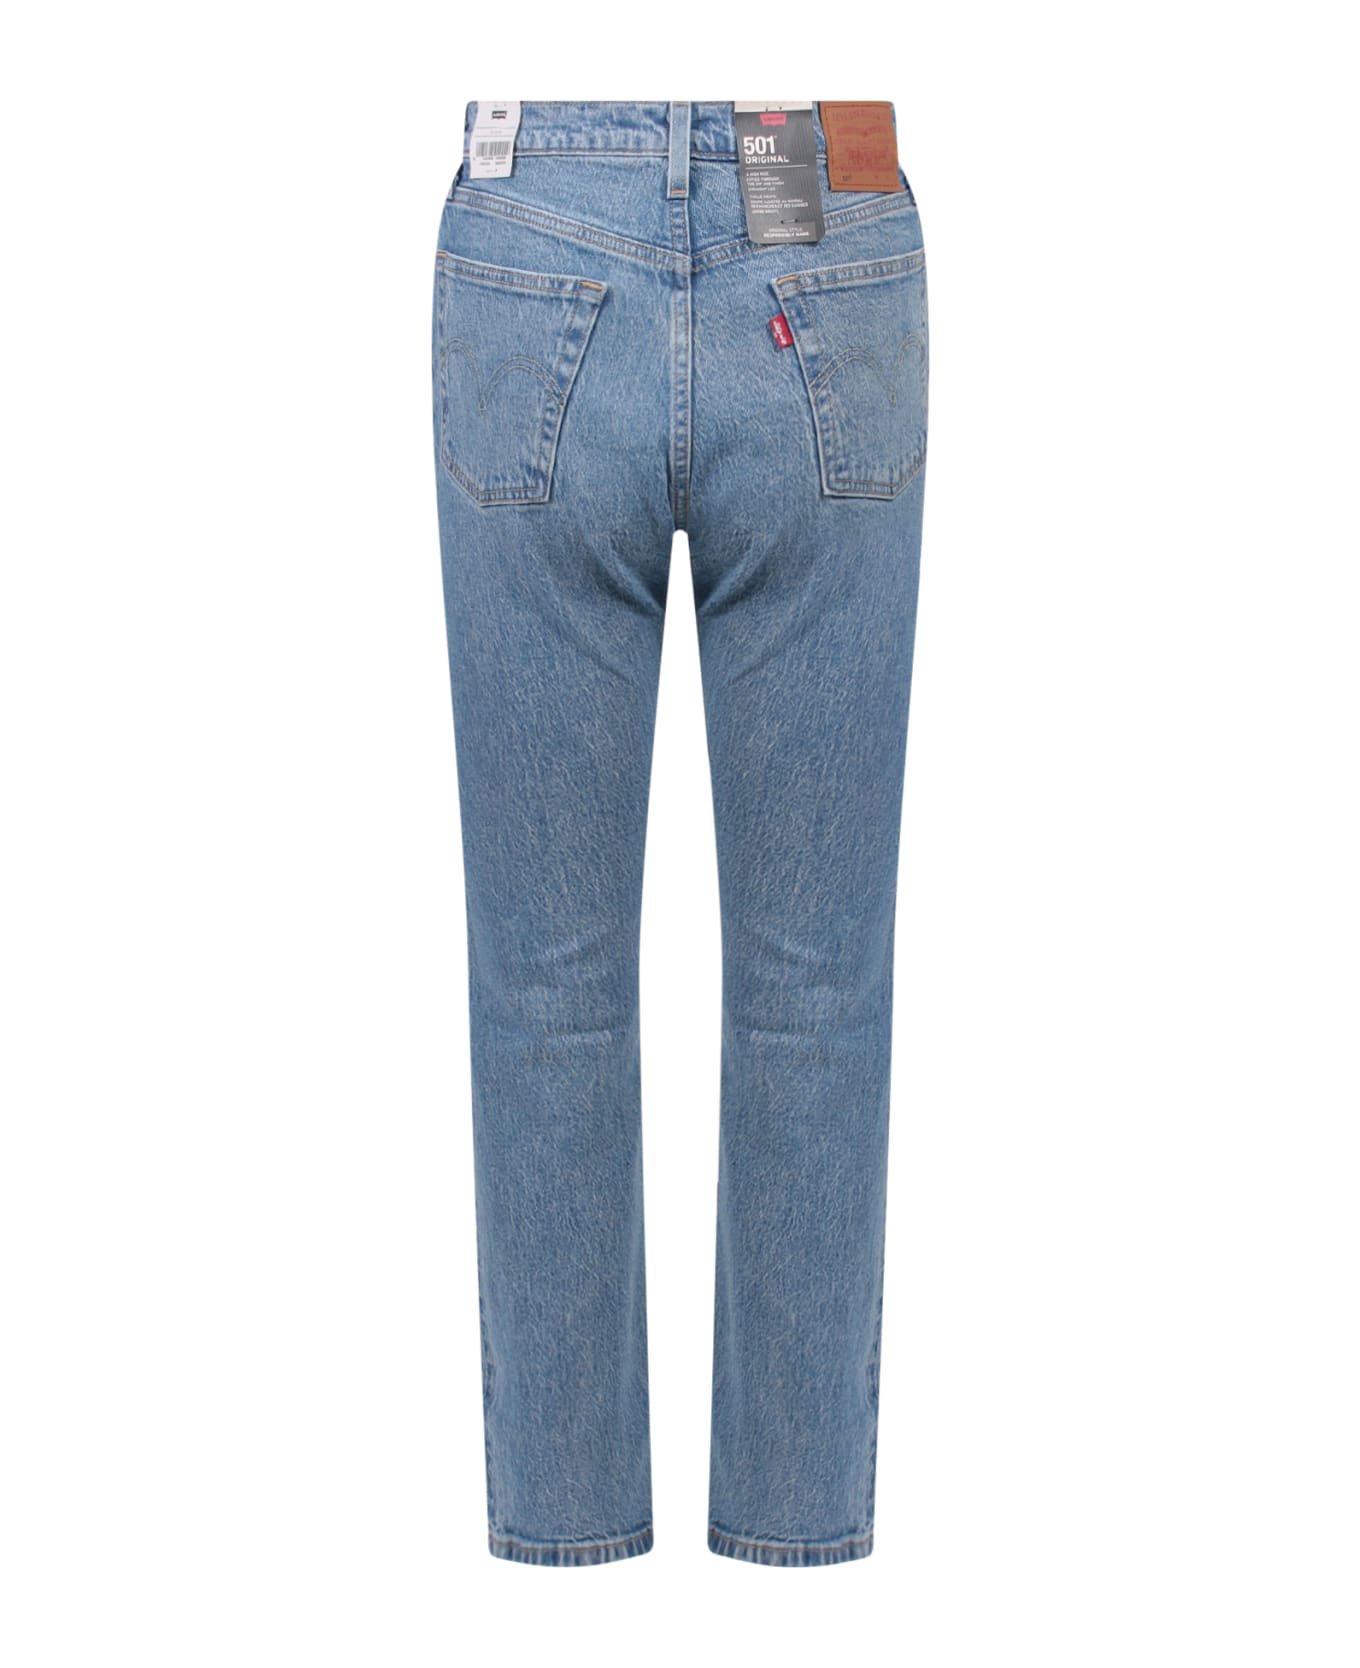 Levi's 501 Jeans - Clear Blue